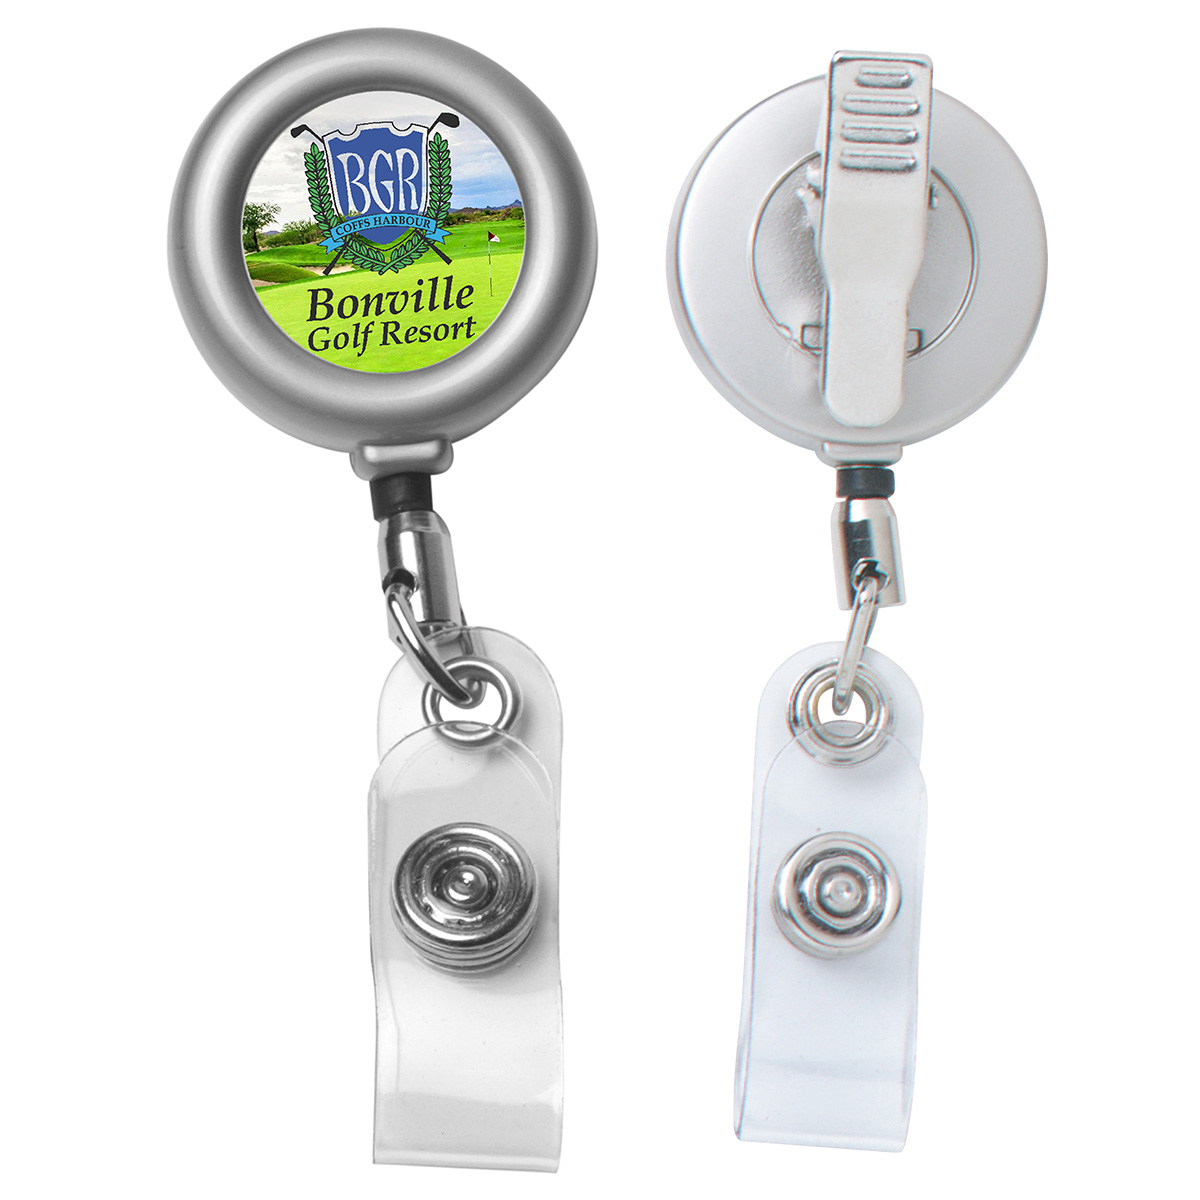 "Marion Matte" Retractable Badge Reel and Badge Holder